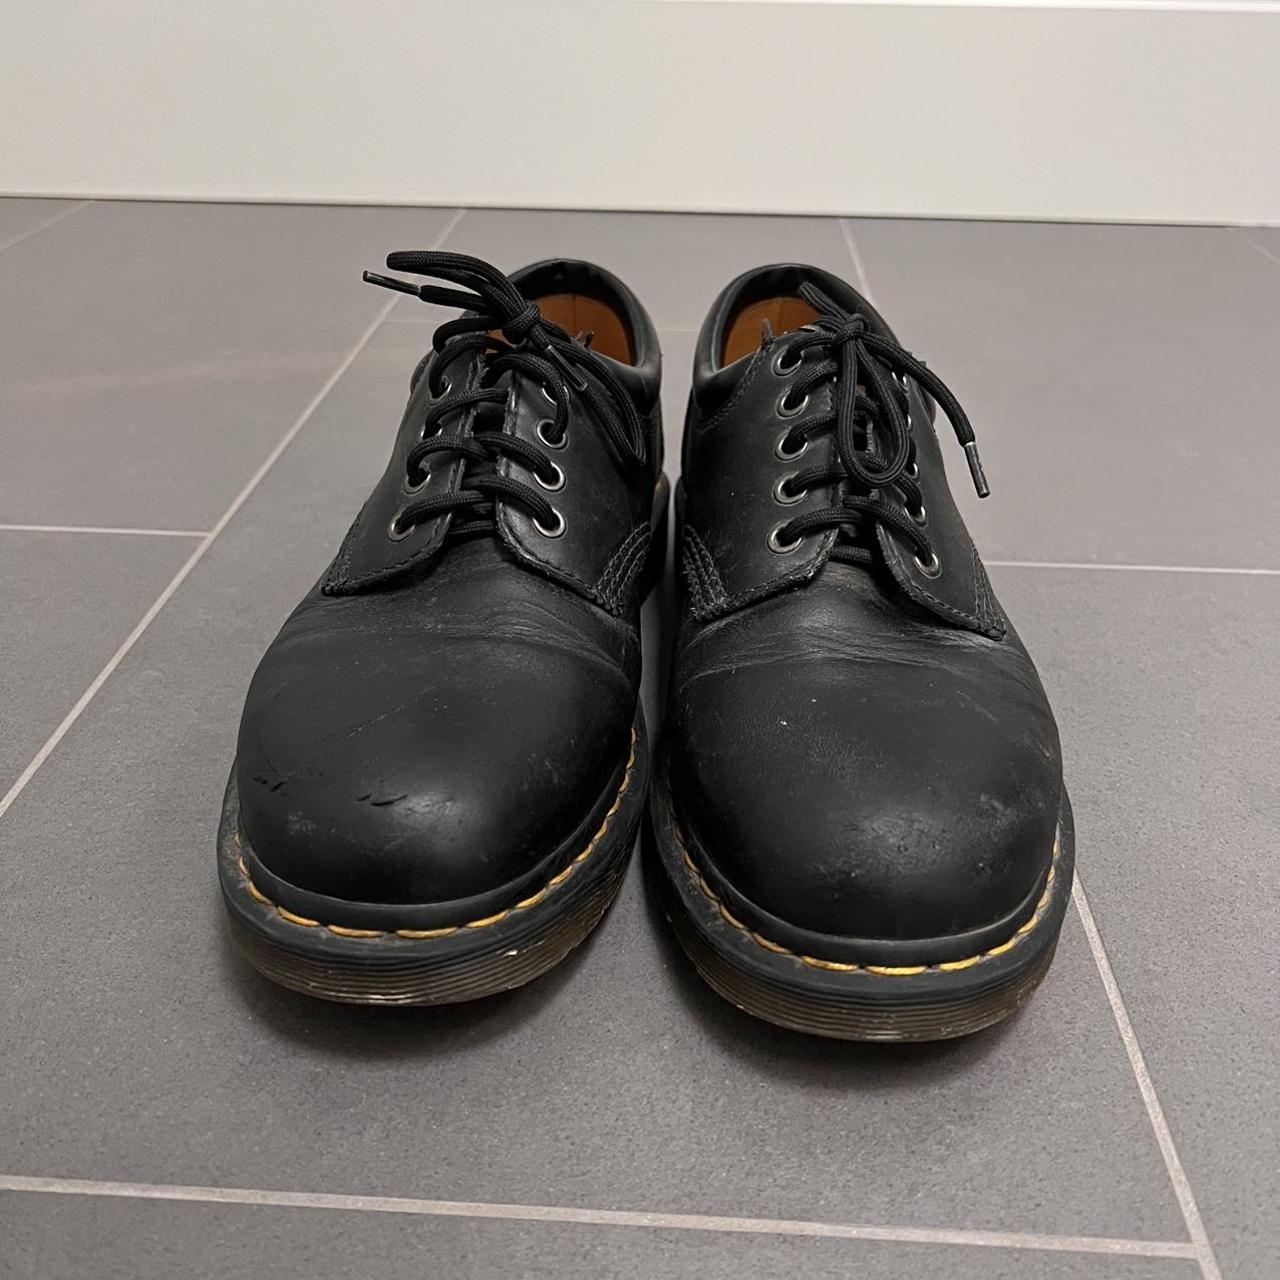 Dr. Martens Men's Black and Yellow Oxfords (4)